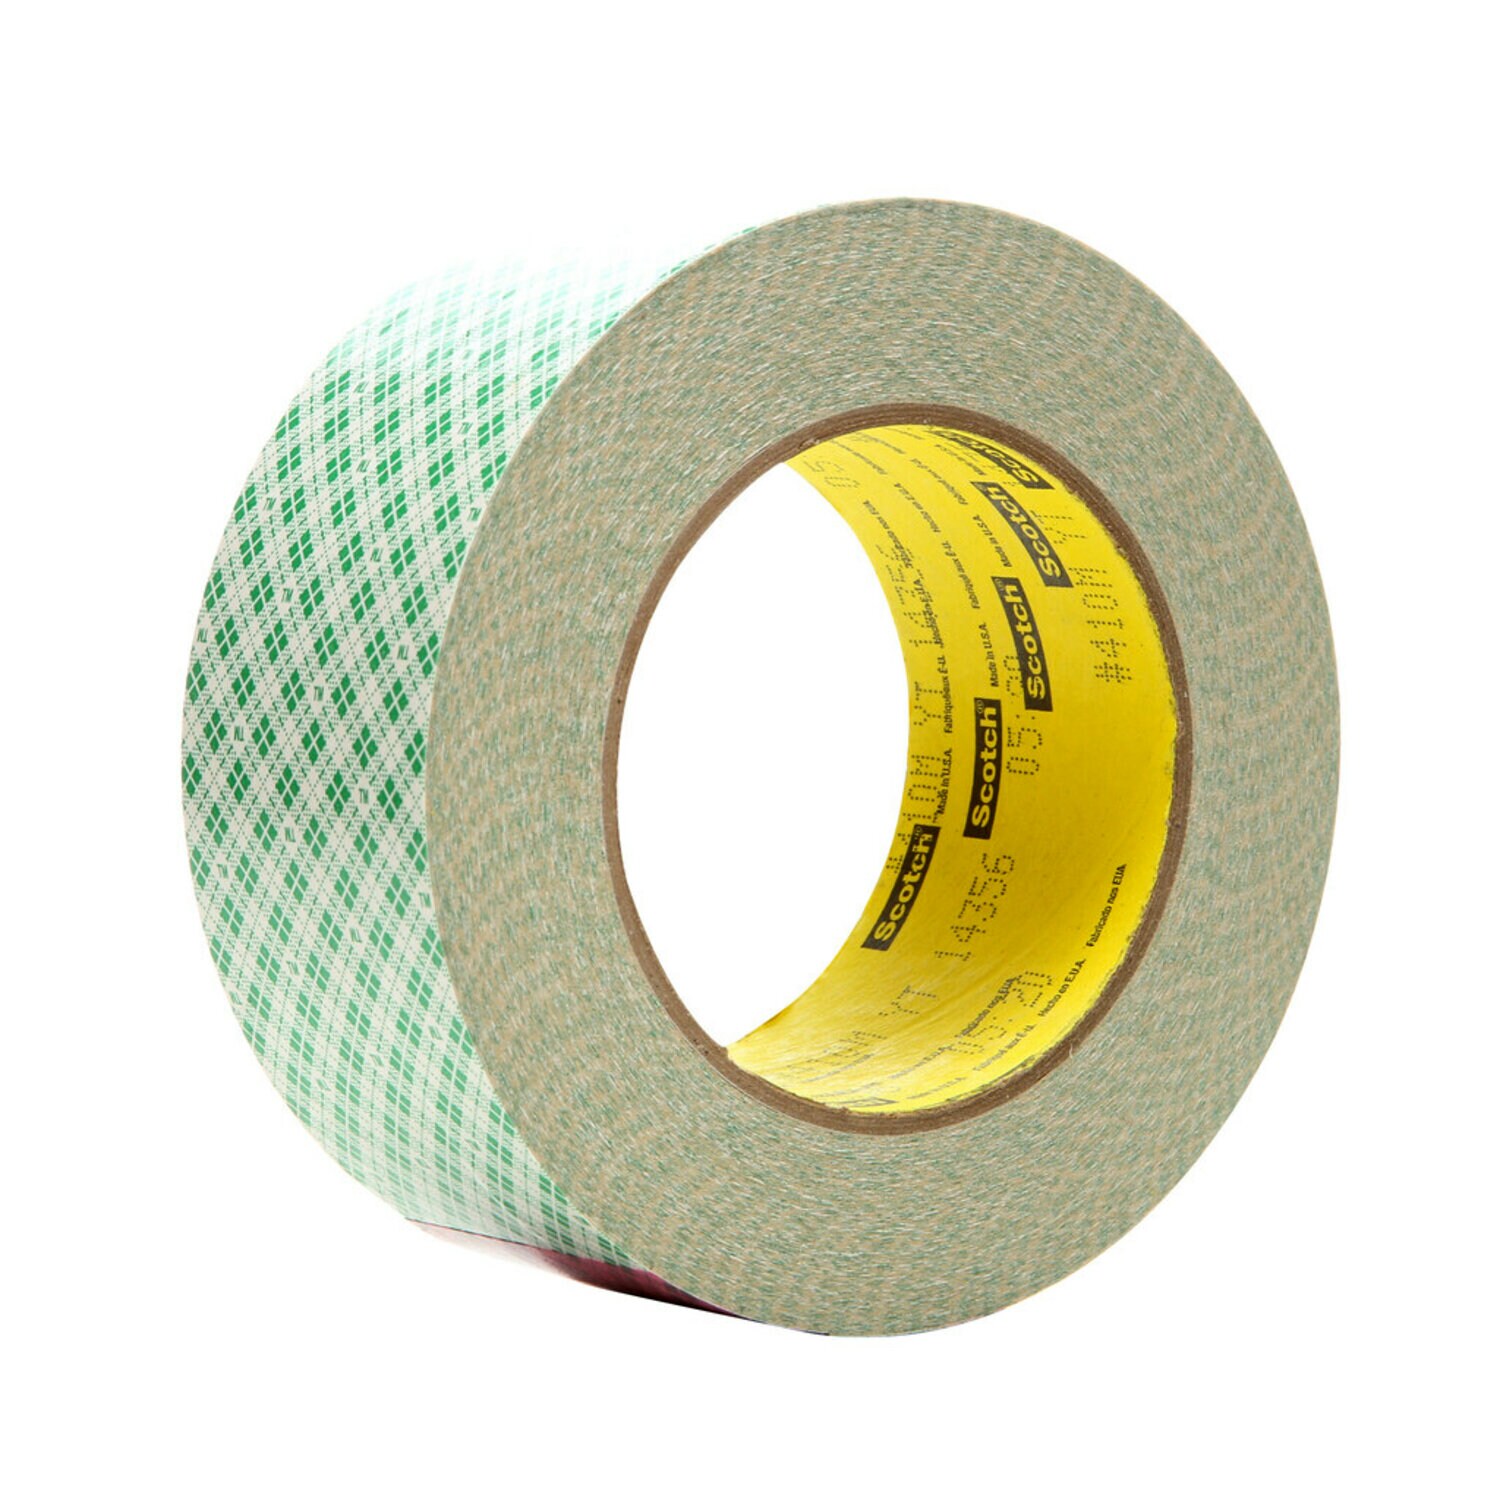 7000049275 - 3M Double Coated Paper Tape 410M, Natural, 2 in x 36 yd, 5 mil, 24
rolls per case